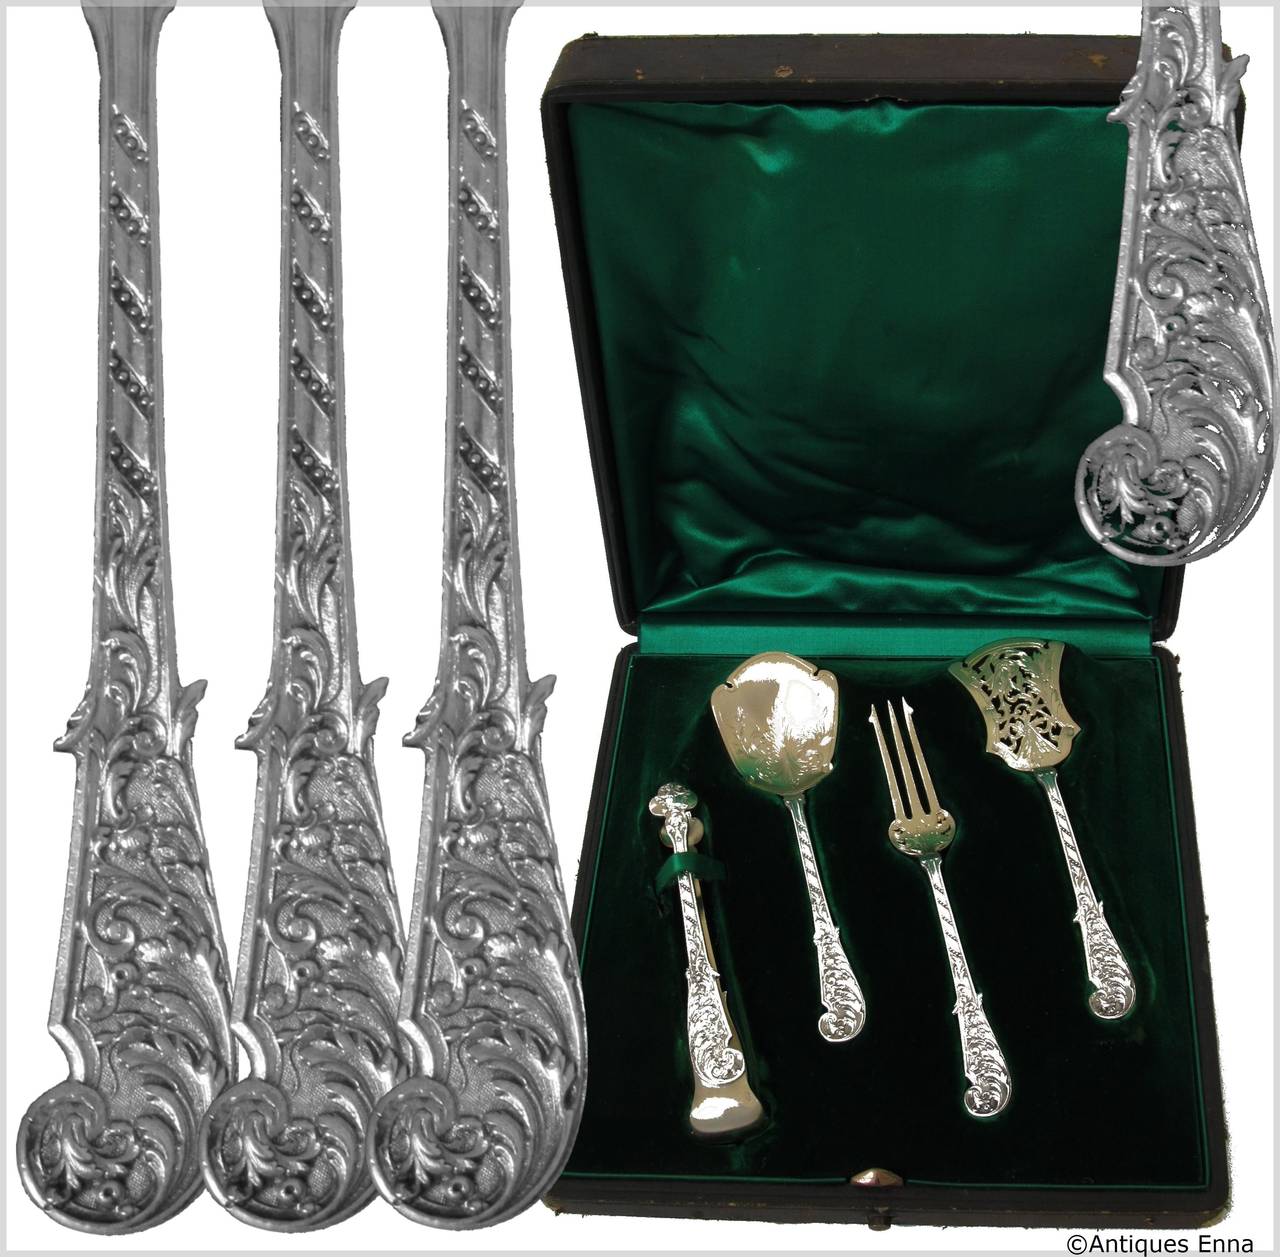 Soufflot French All Sterling Silver Vermeil Dessert Set 4 pc w/box Rococo

Head of Minerve 1 st titre for 950/1000 French Sterling Silver Vermeil guarantee (server, fork and spoon ) and Boar's Head for 800/1000 French Sterling Silver Vermeil (